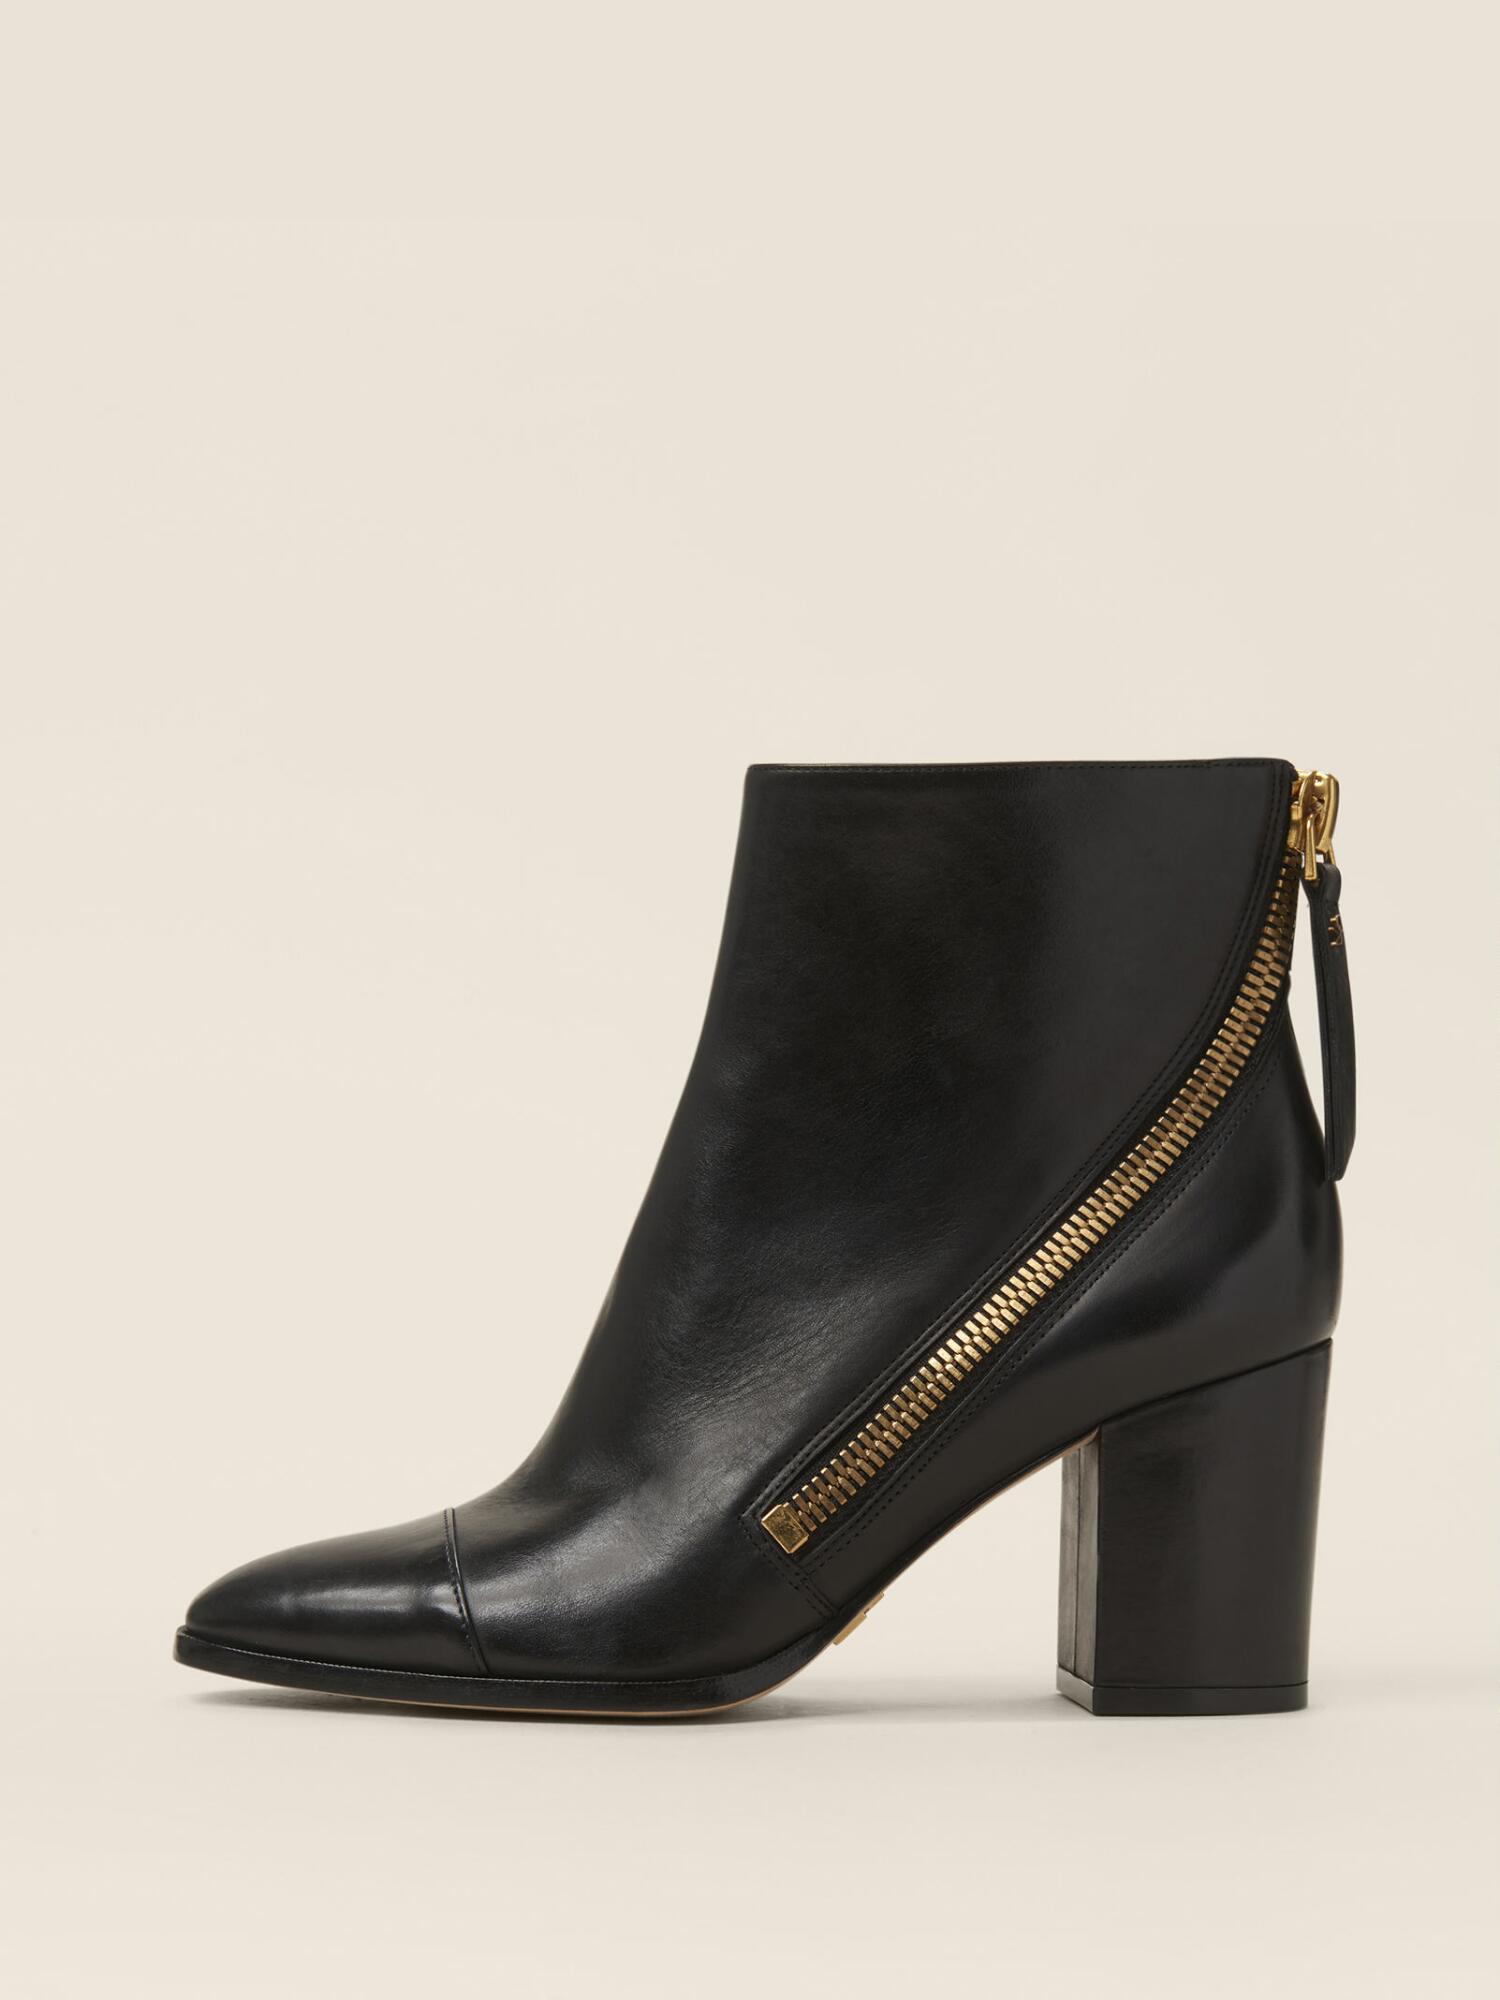 Donna Karan Alina Leather Ankle Boot In Black | ModeSens